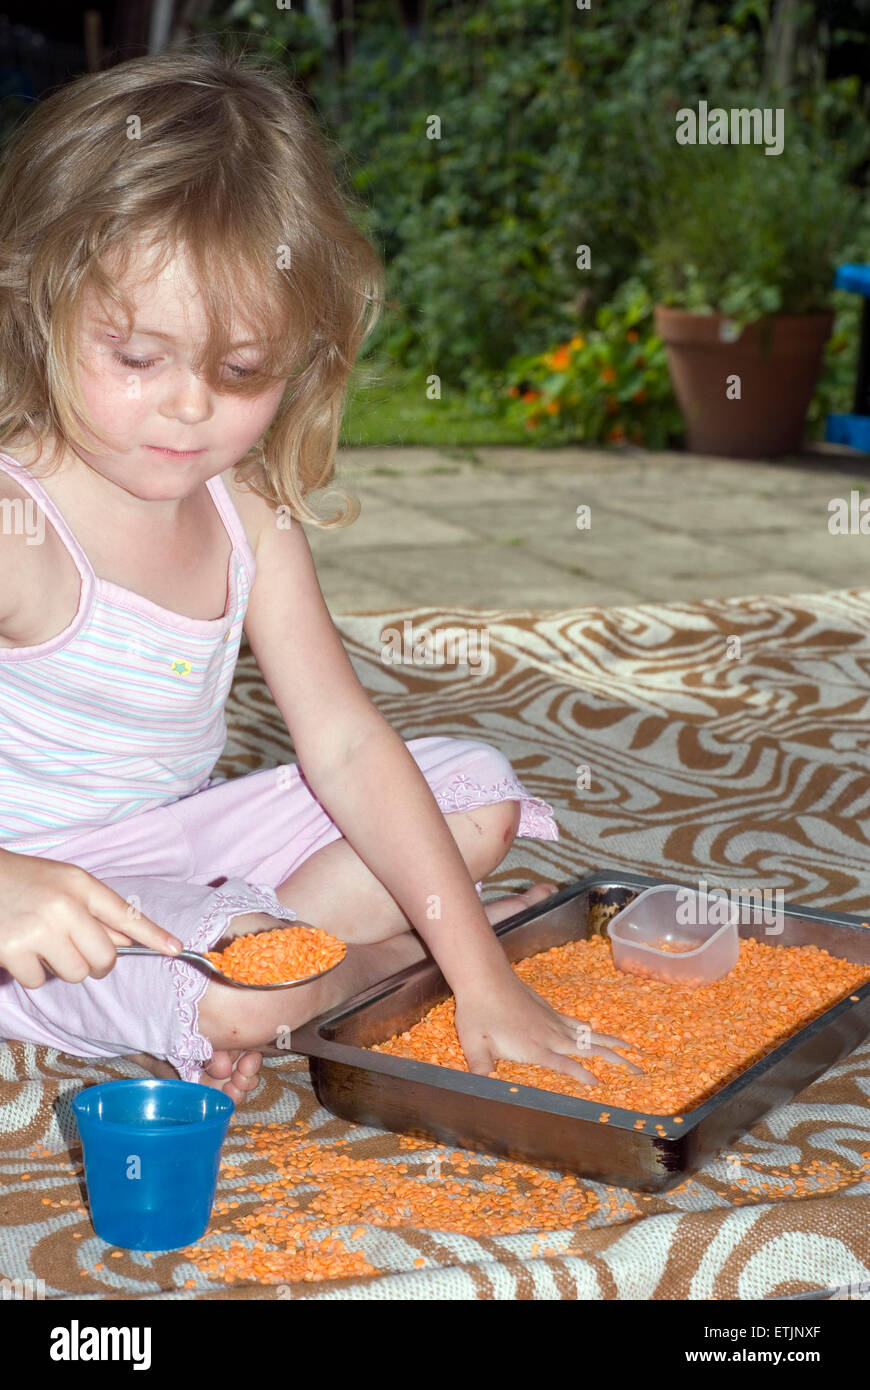 Little girl playing tactile games with a tray of lentils and some pots and spoons outdoors in the shade on a summer day, UK Stock Photo